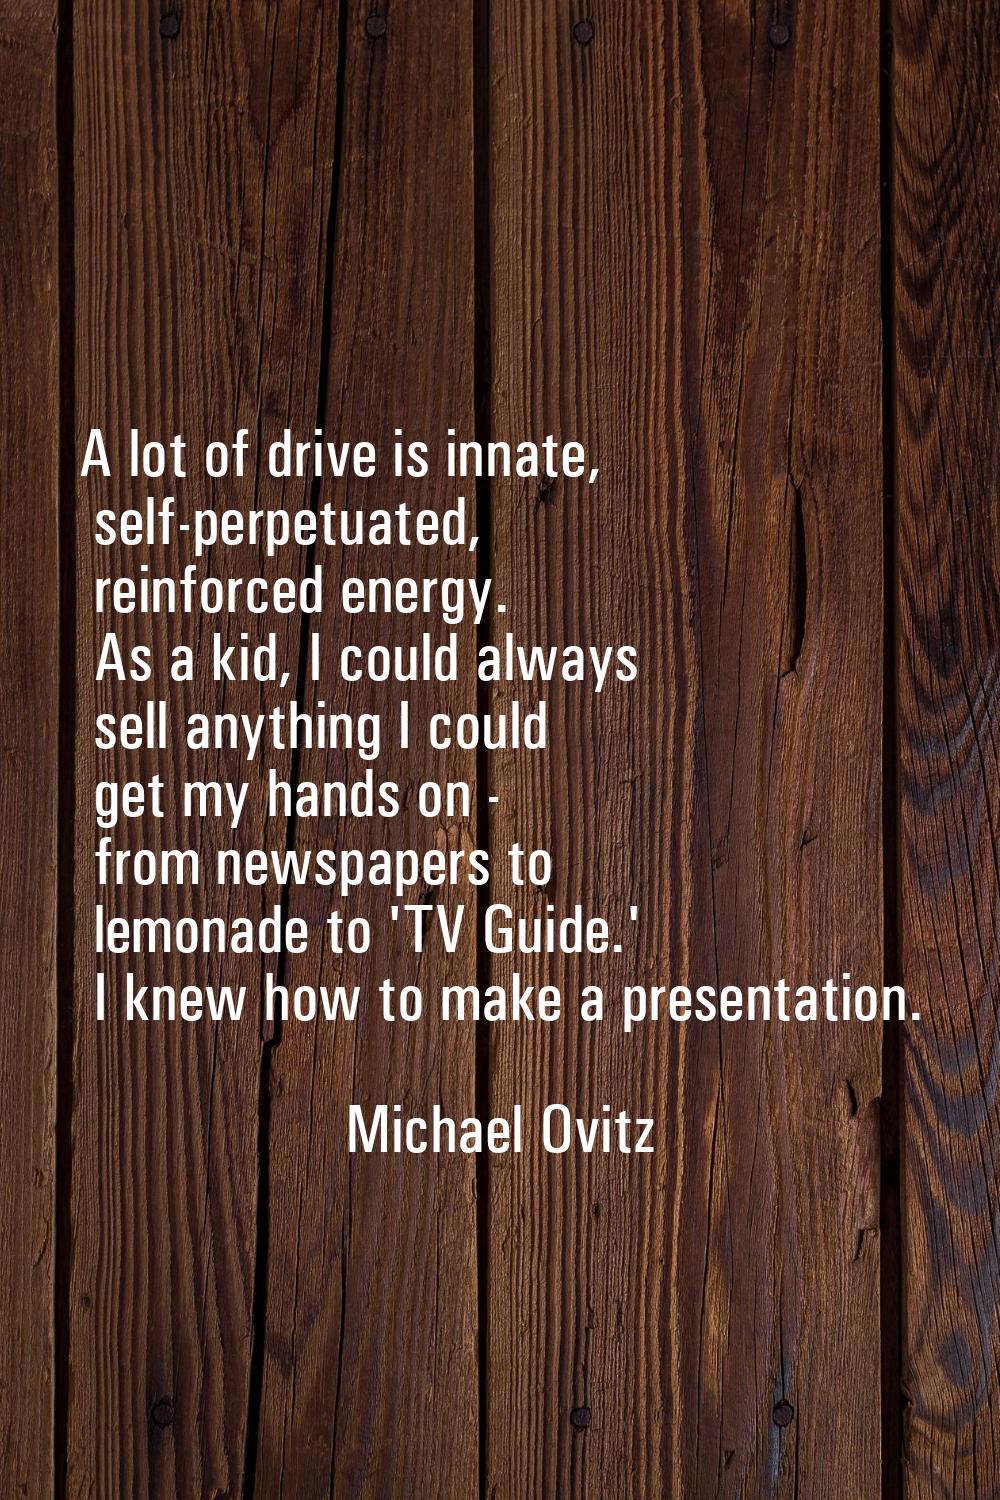 A lot of drive is innate, self-perpetuated, reinforced energy. As a kid, I could always sell anythi